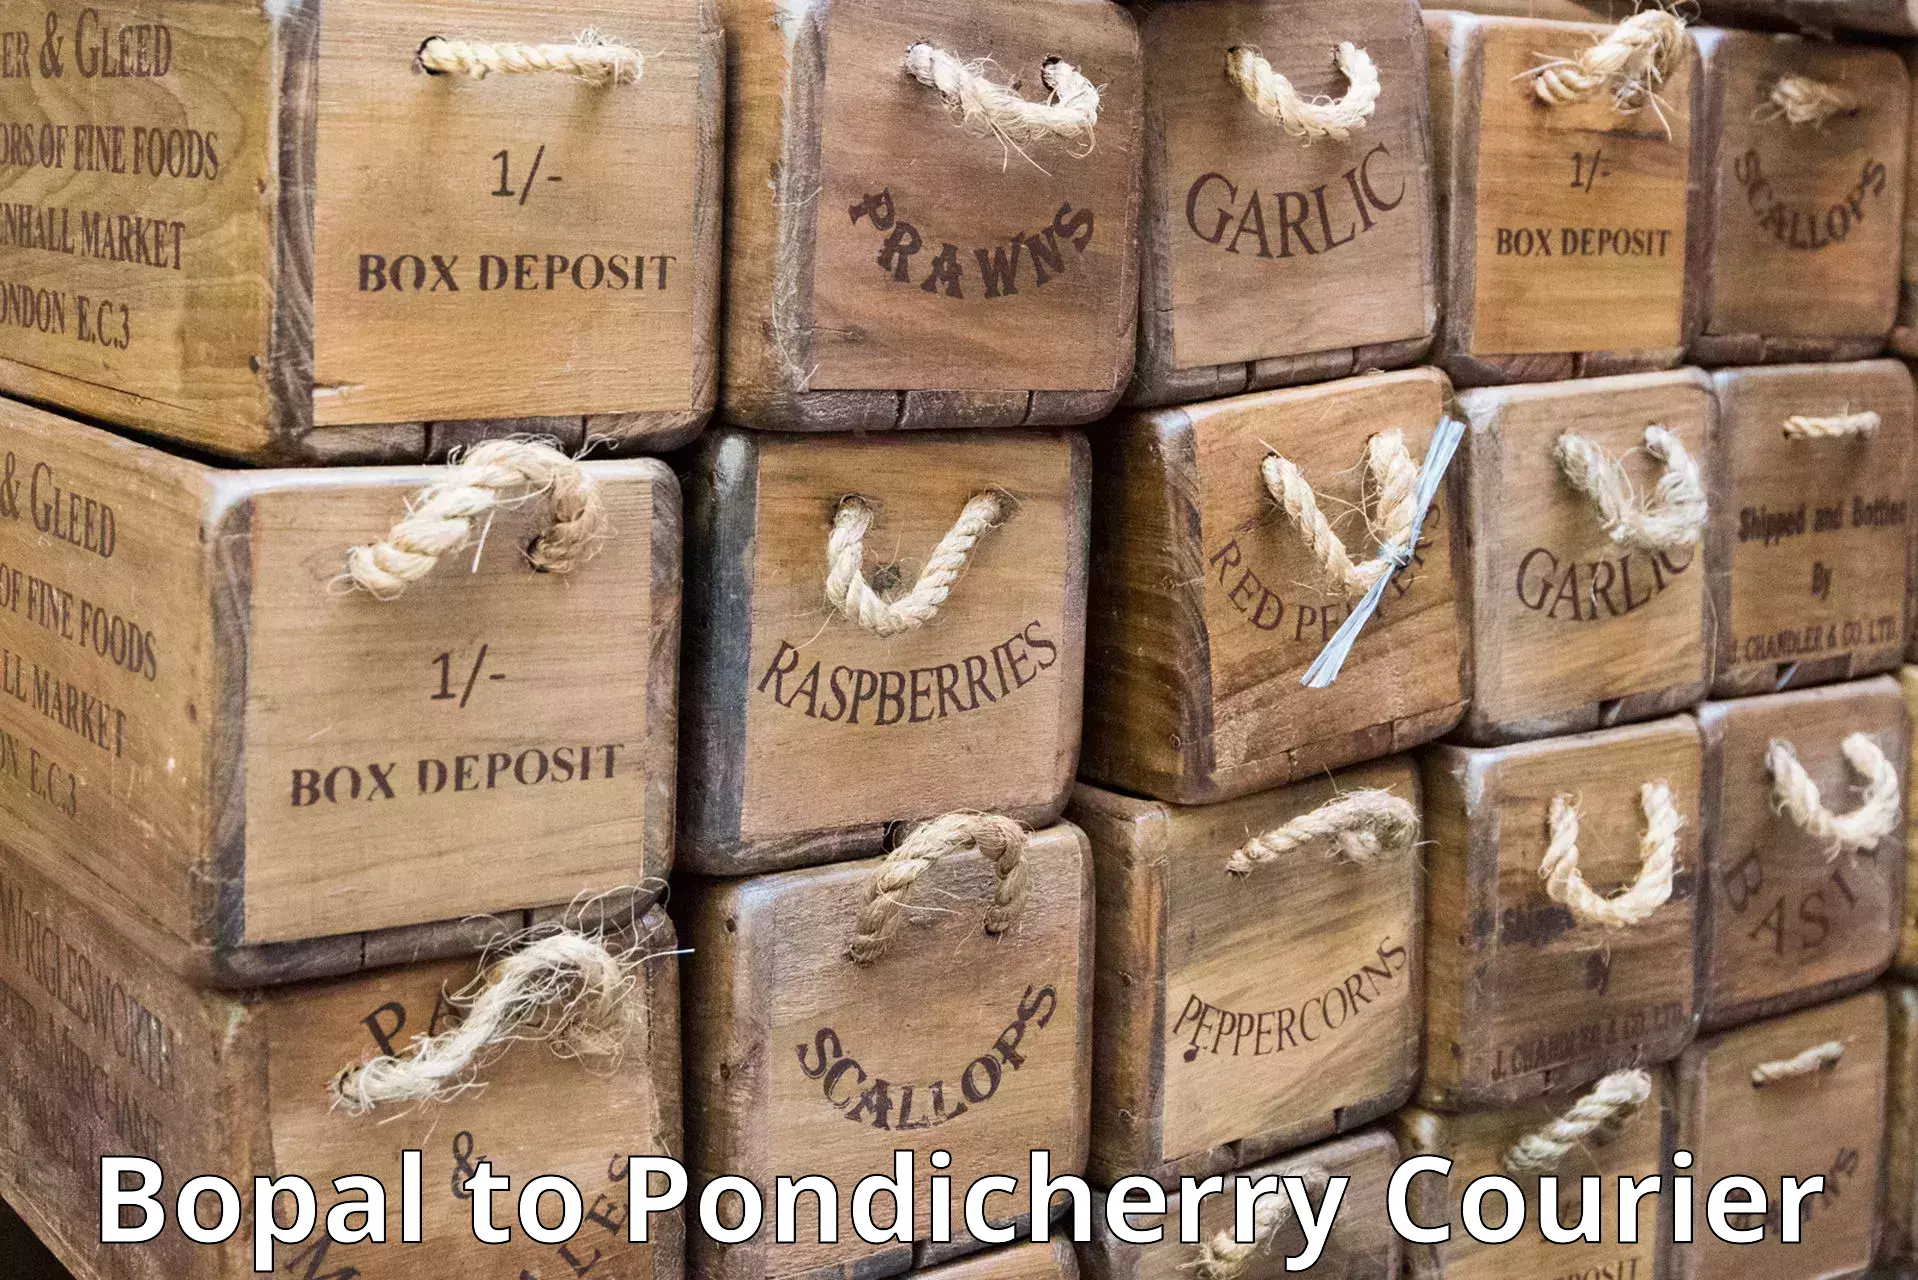 Easy access courier services Bopal to Pondicherry University